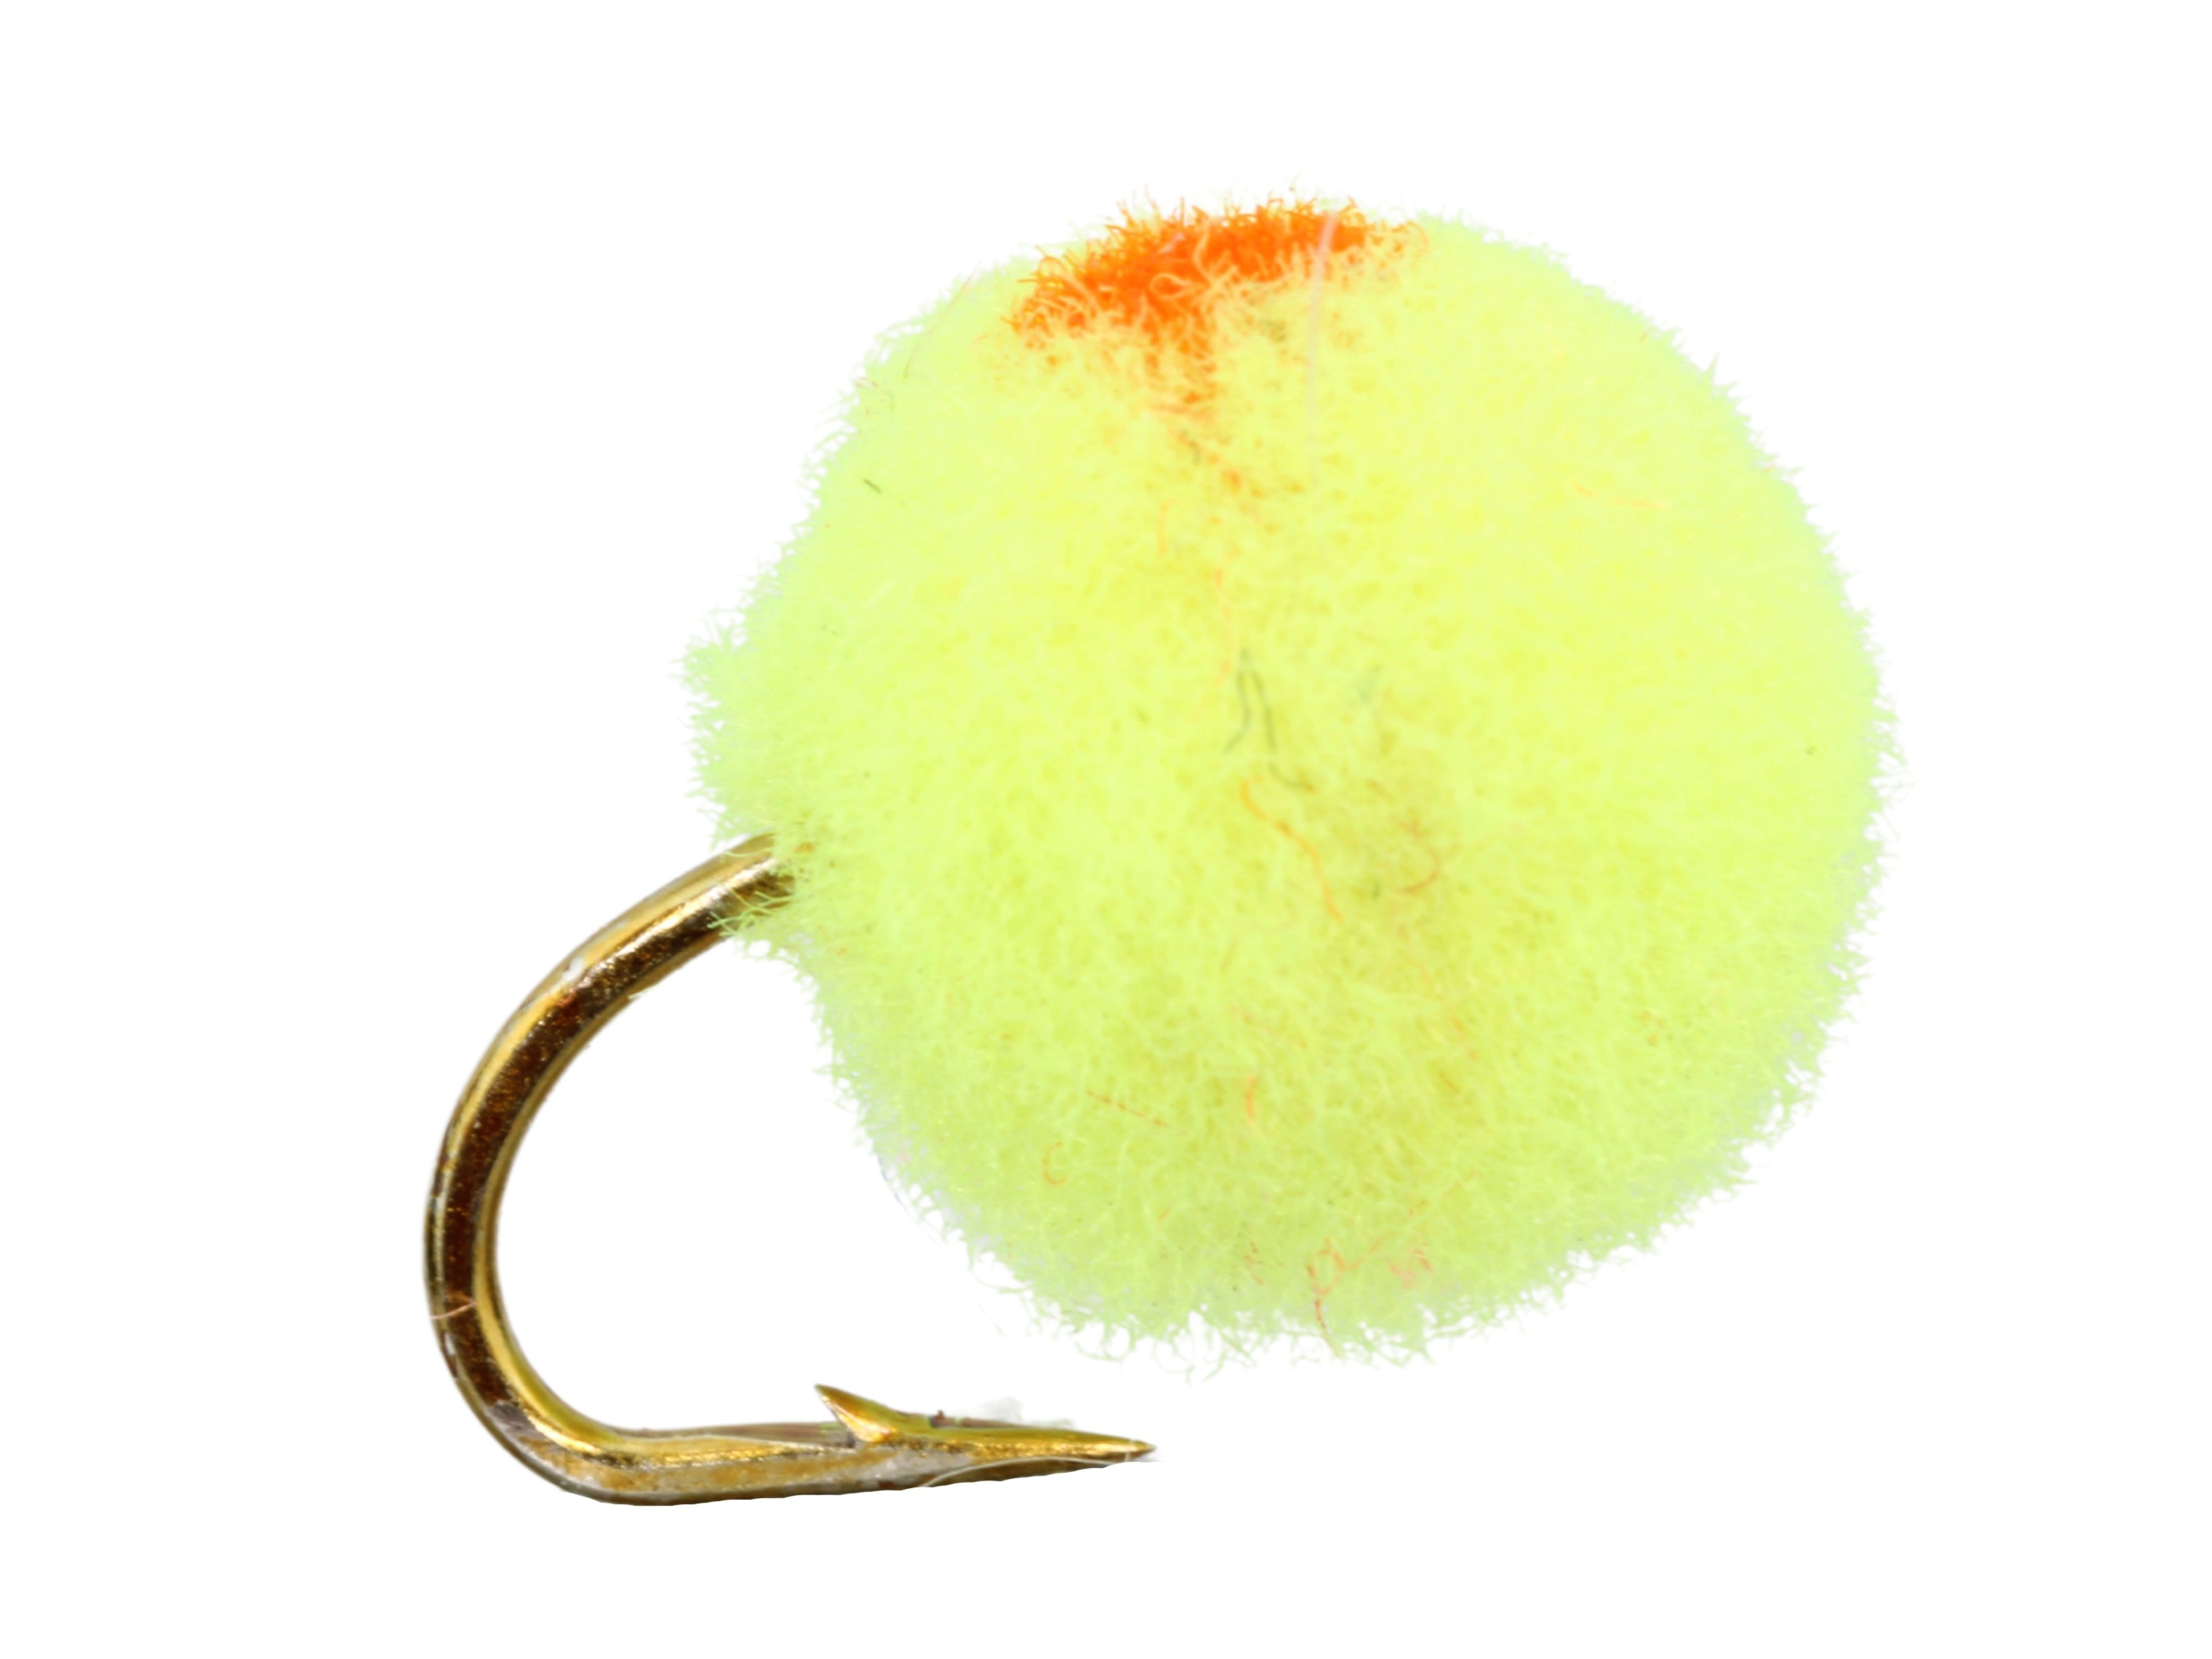 Wild Water Fly Fishing Yellow Egg with Orange Spot, Size 12, Qty. 6